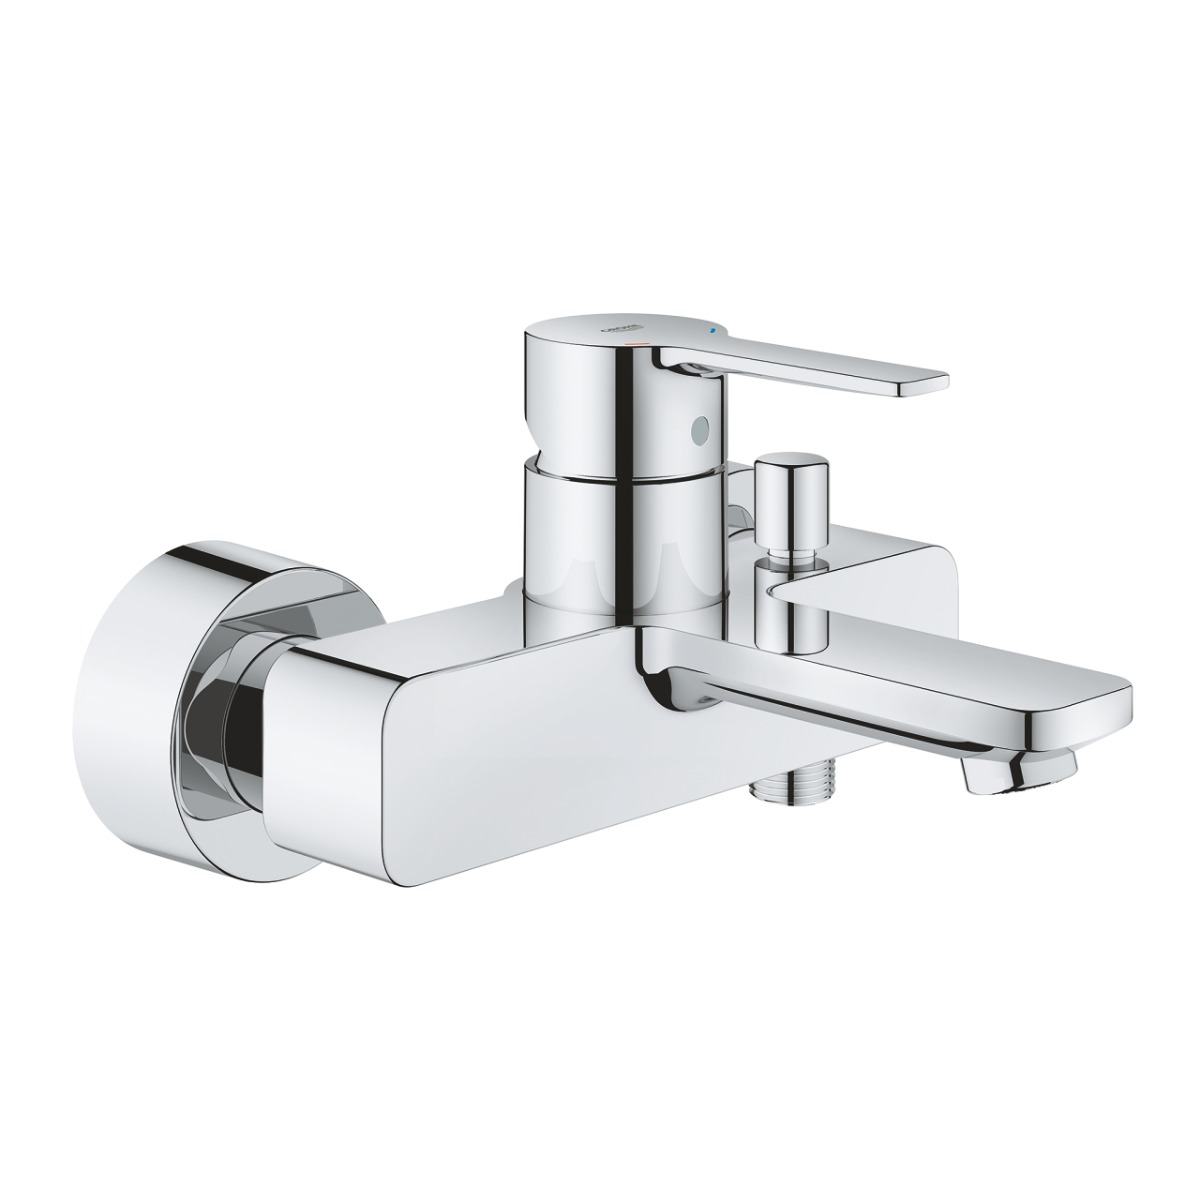 Baterie cada dus, Grohe Lineare,crom-33849001 baterii-lux.ro